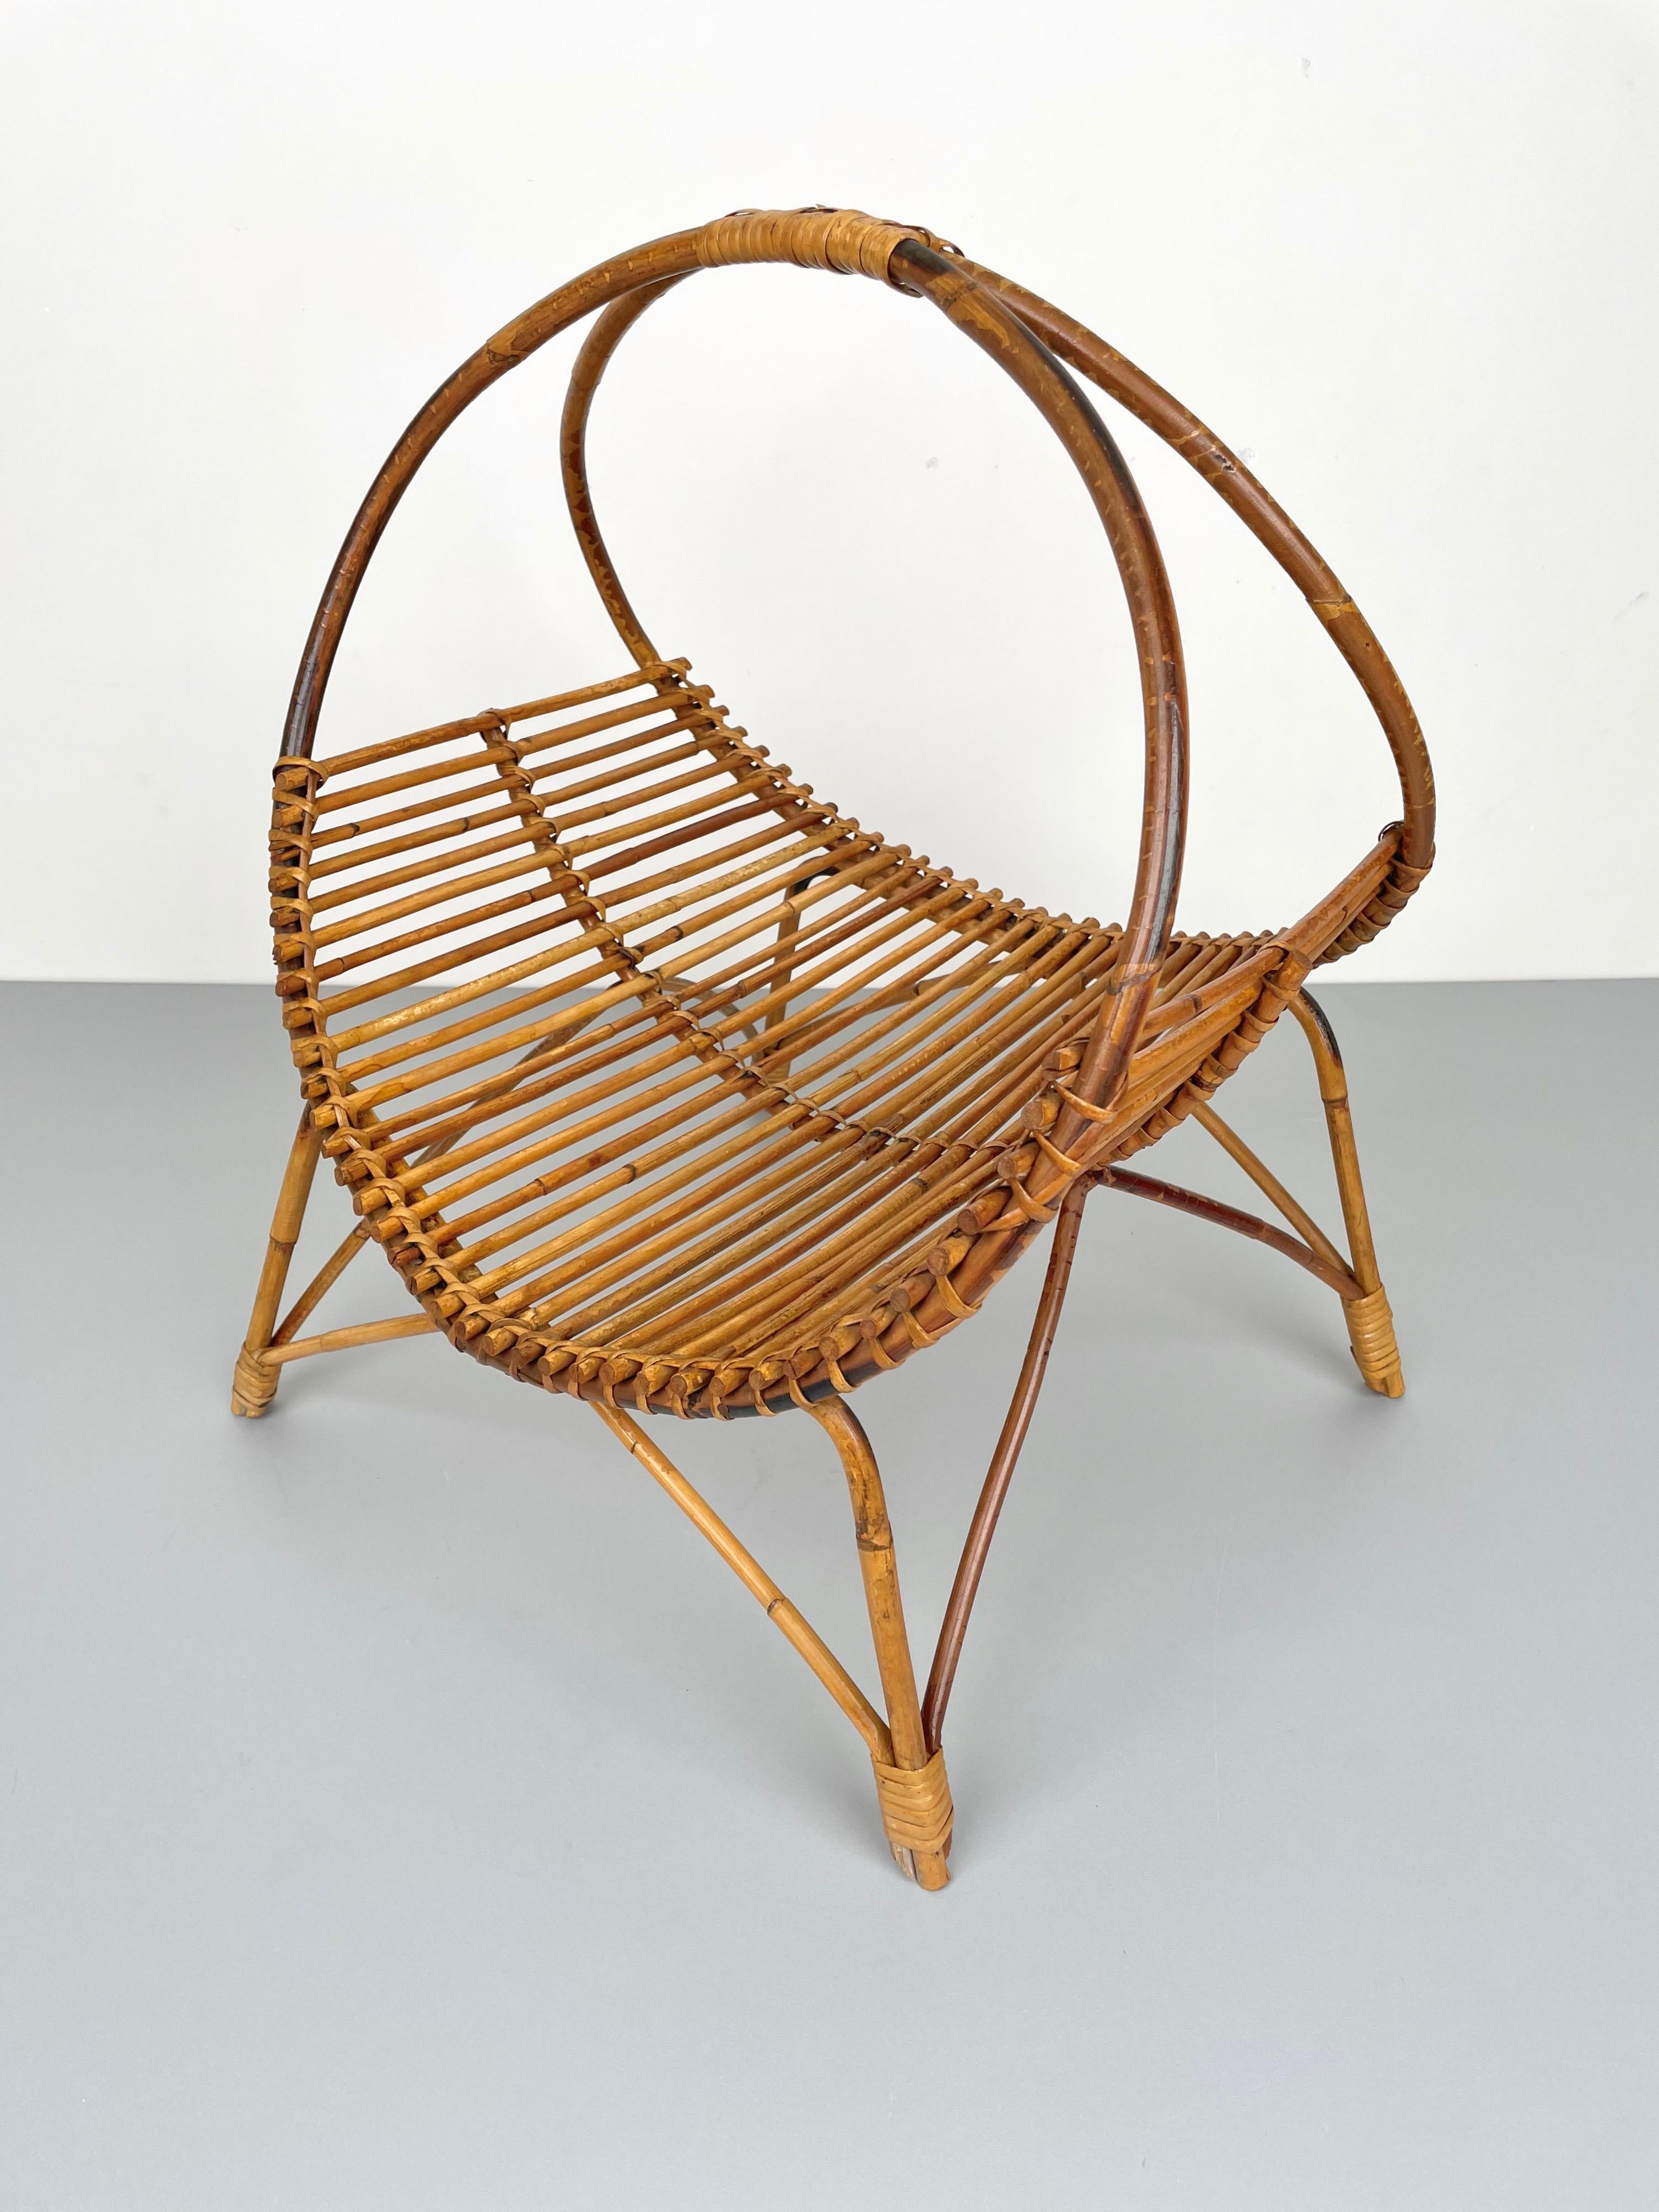 Rattan & Bamboo Curved Magazine Rack, Italy, 1960s For Sale 4